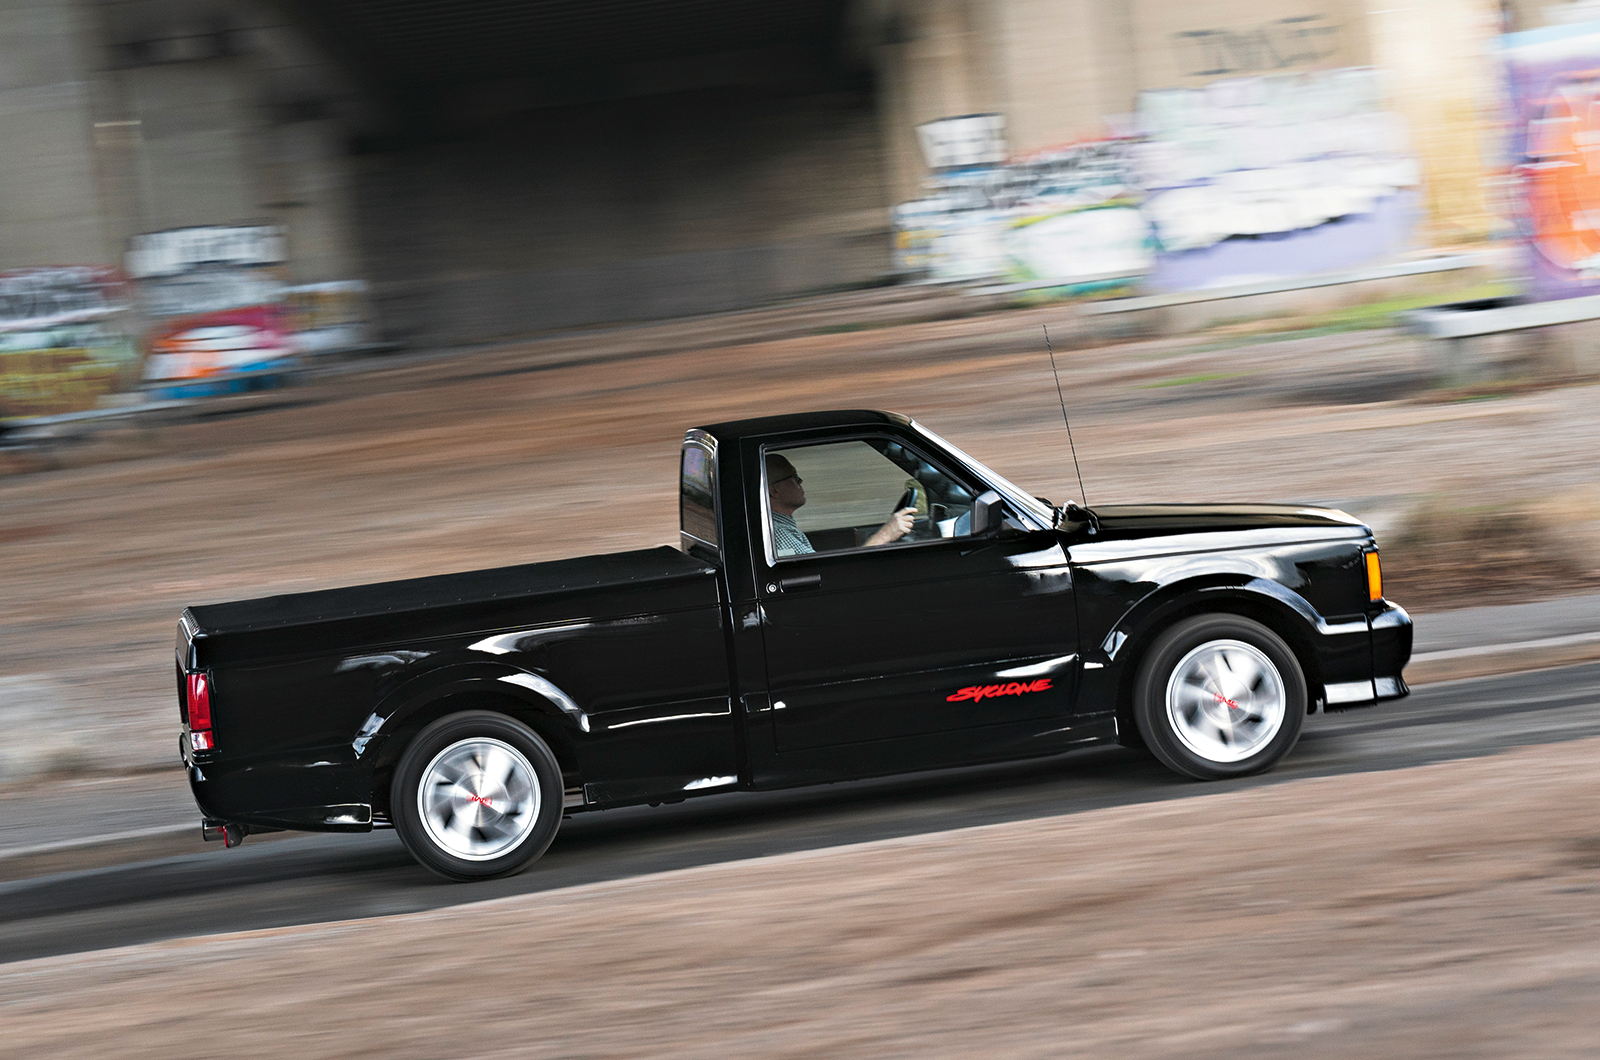 Classic & Sports Car – GMC Syclone vs Typhoon: cooking up a storm